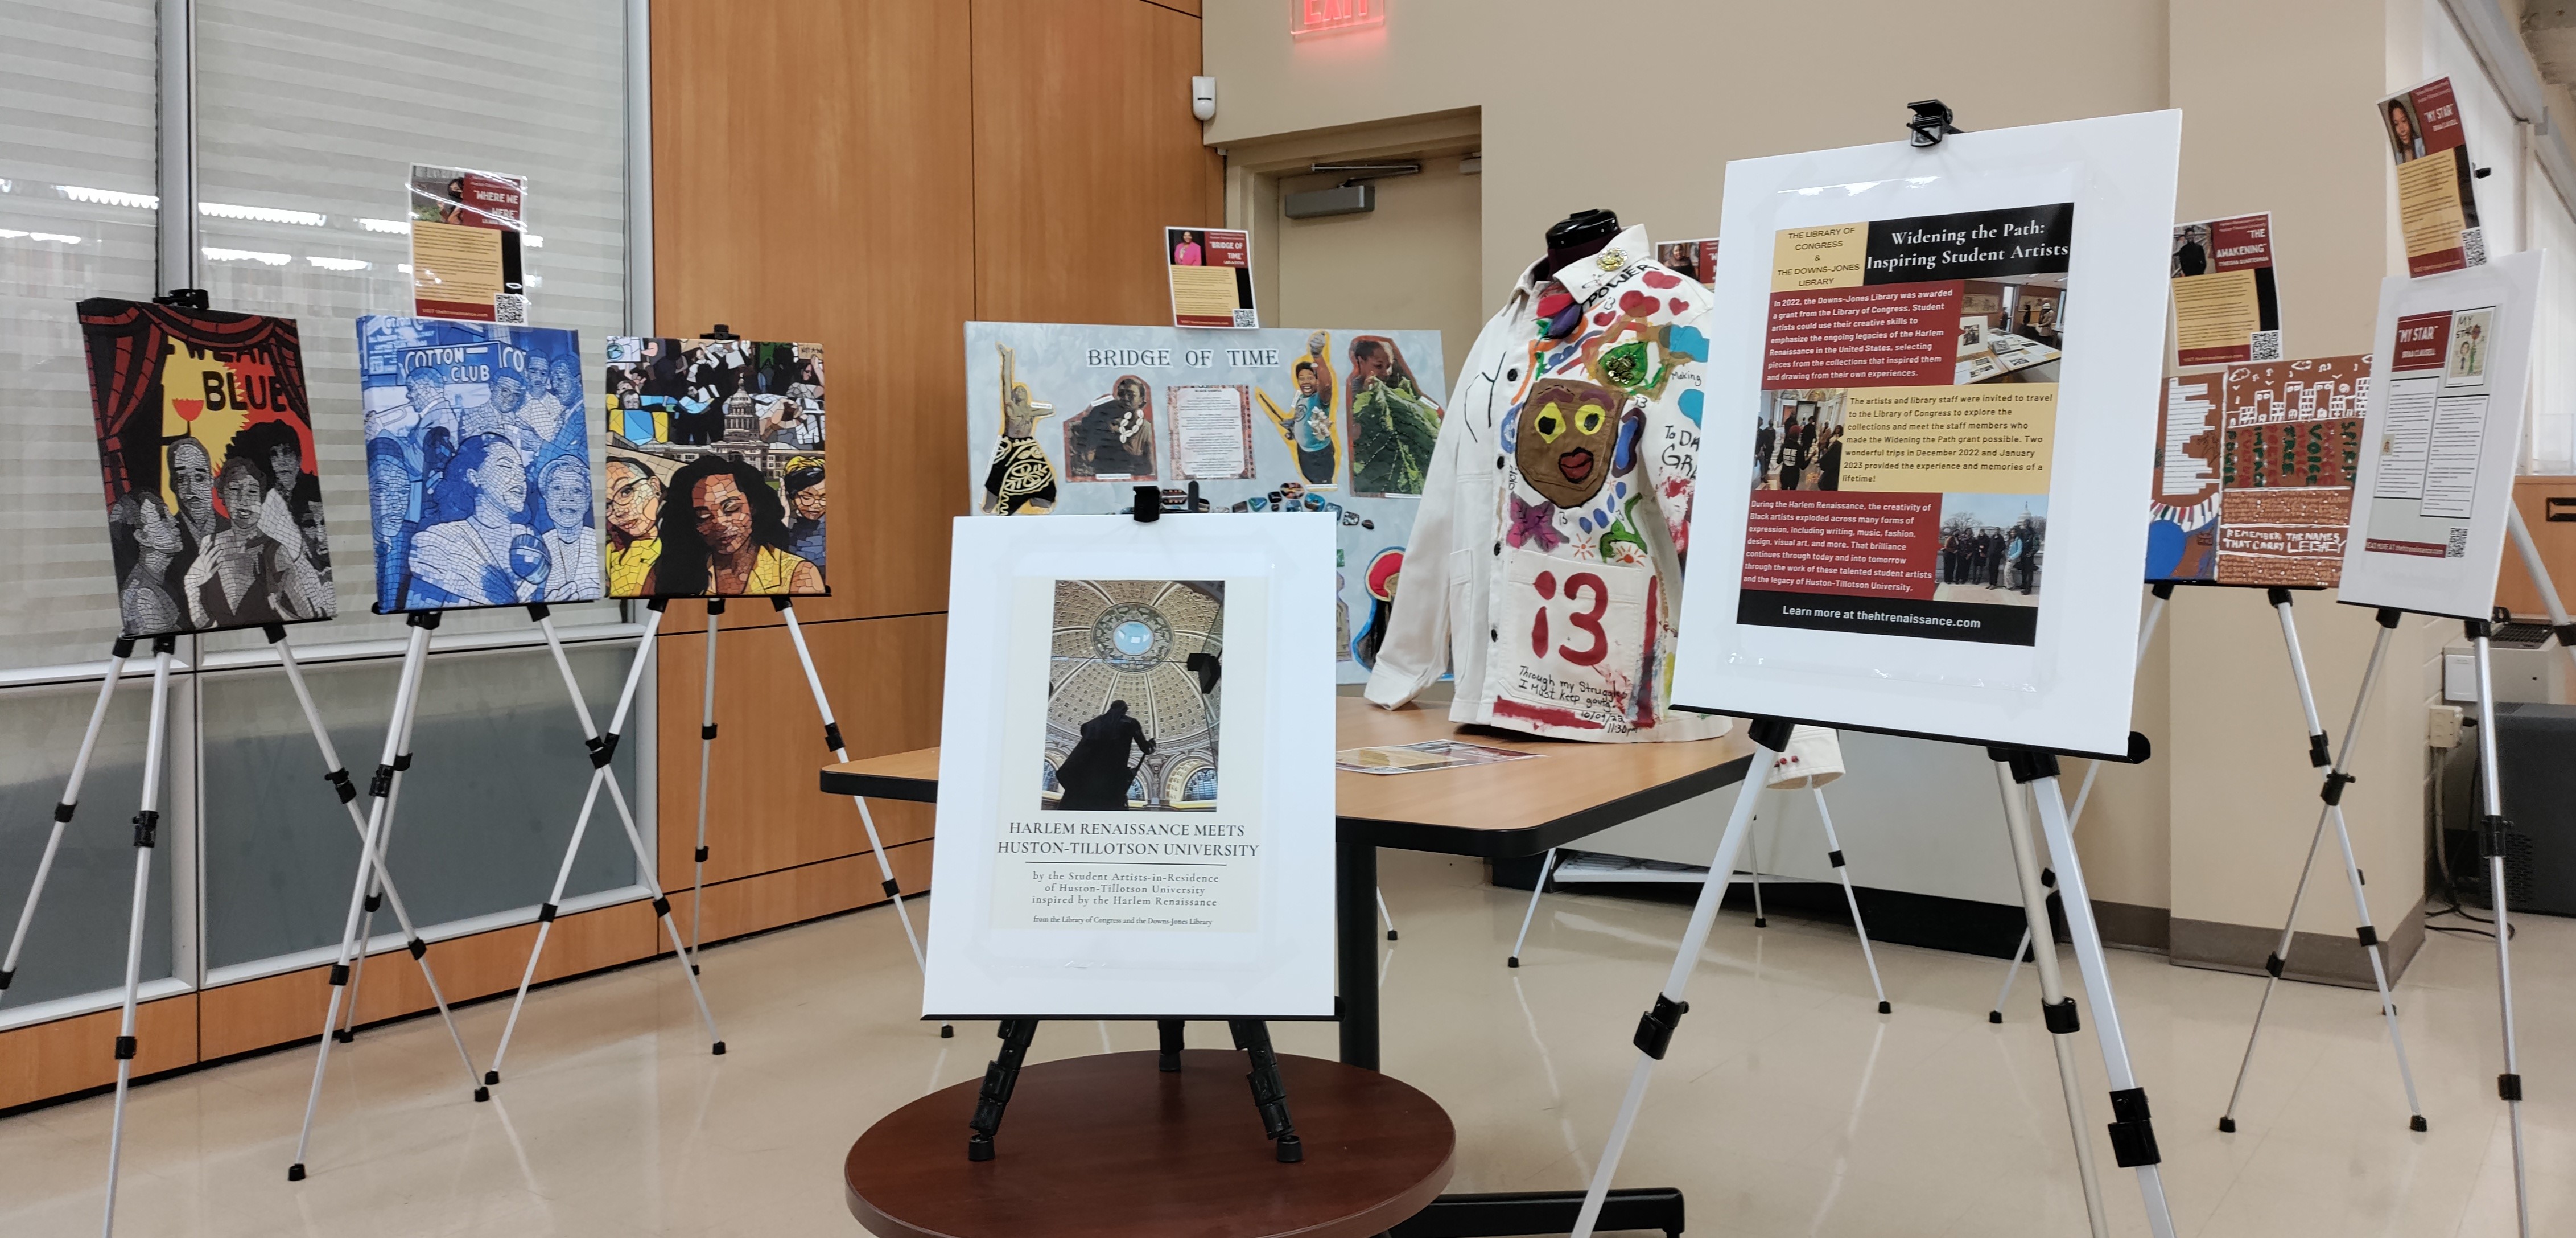 Photograph of an art exhibit in the library. Multimedia artworks are displayed on easels surrounding a central table.